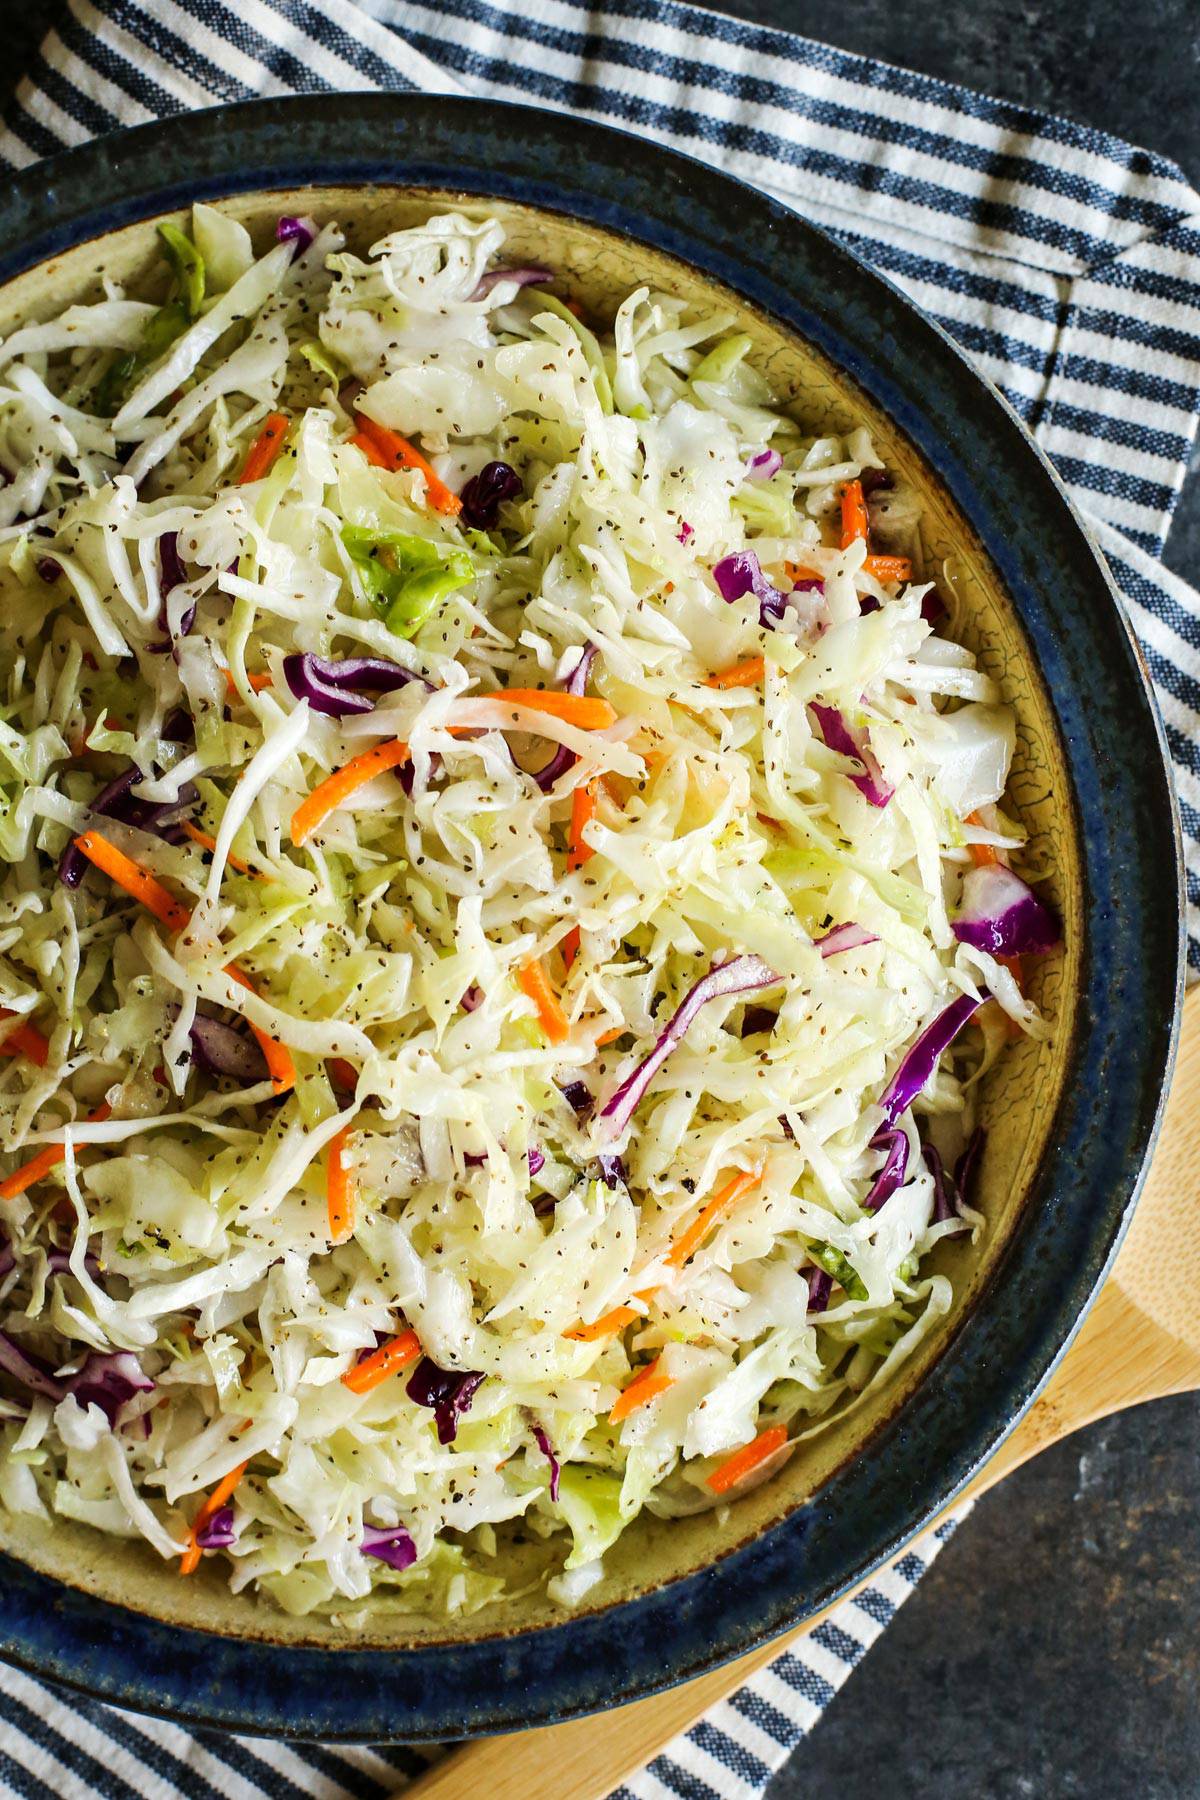 coleslaw dressing on shredded cabbage in a pottery bowl